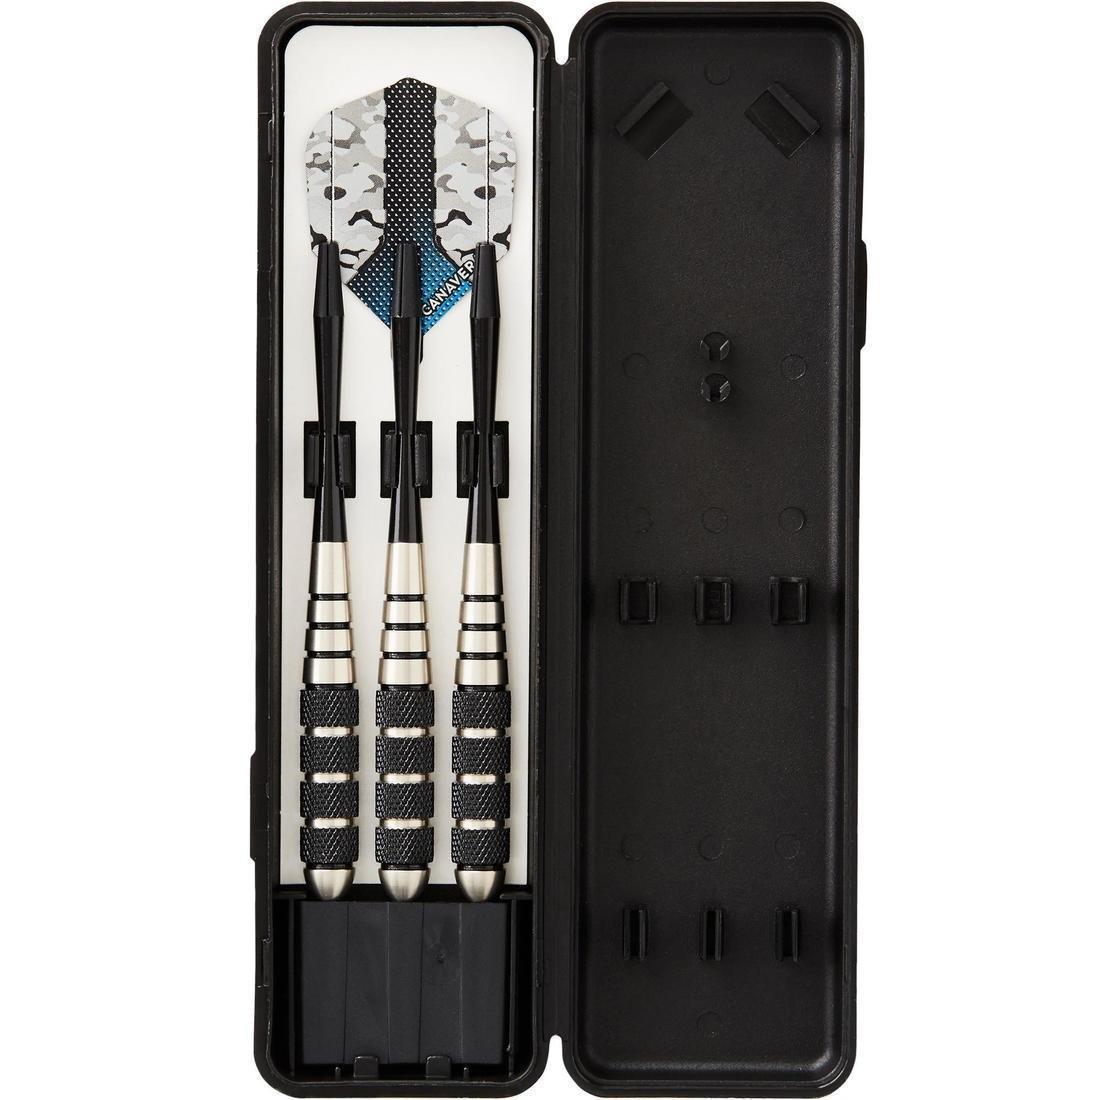 CANAVERAL - T560 Steel-Tipped Darts Tri-Pack